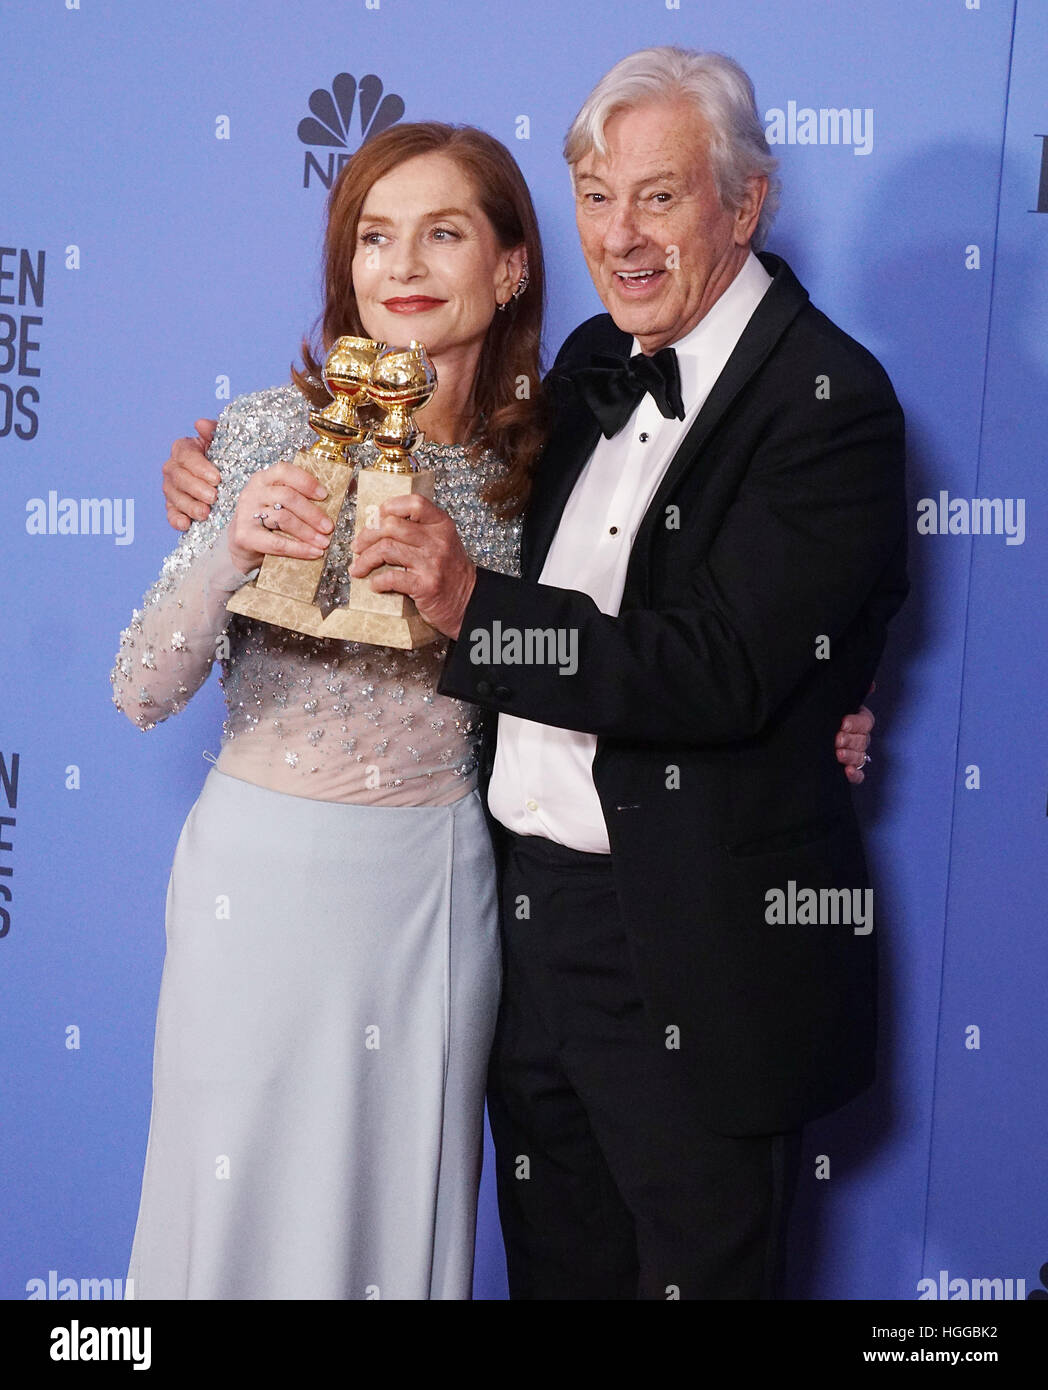 Los Angeles, USA. 08th Jan, 2017. Isabelle Huppert, Paul Verhoeven 332 Press room at the 74th Annual Golden Globe Awards at the Beverly Hilton in Los Angeles. January 08, 2017 © Gamma-USA/Alamy Live News Stock Photo